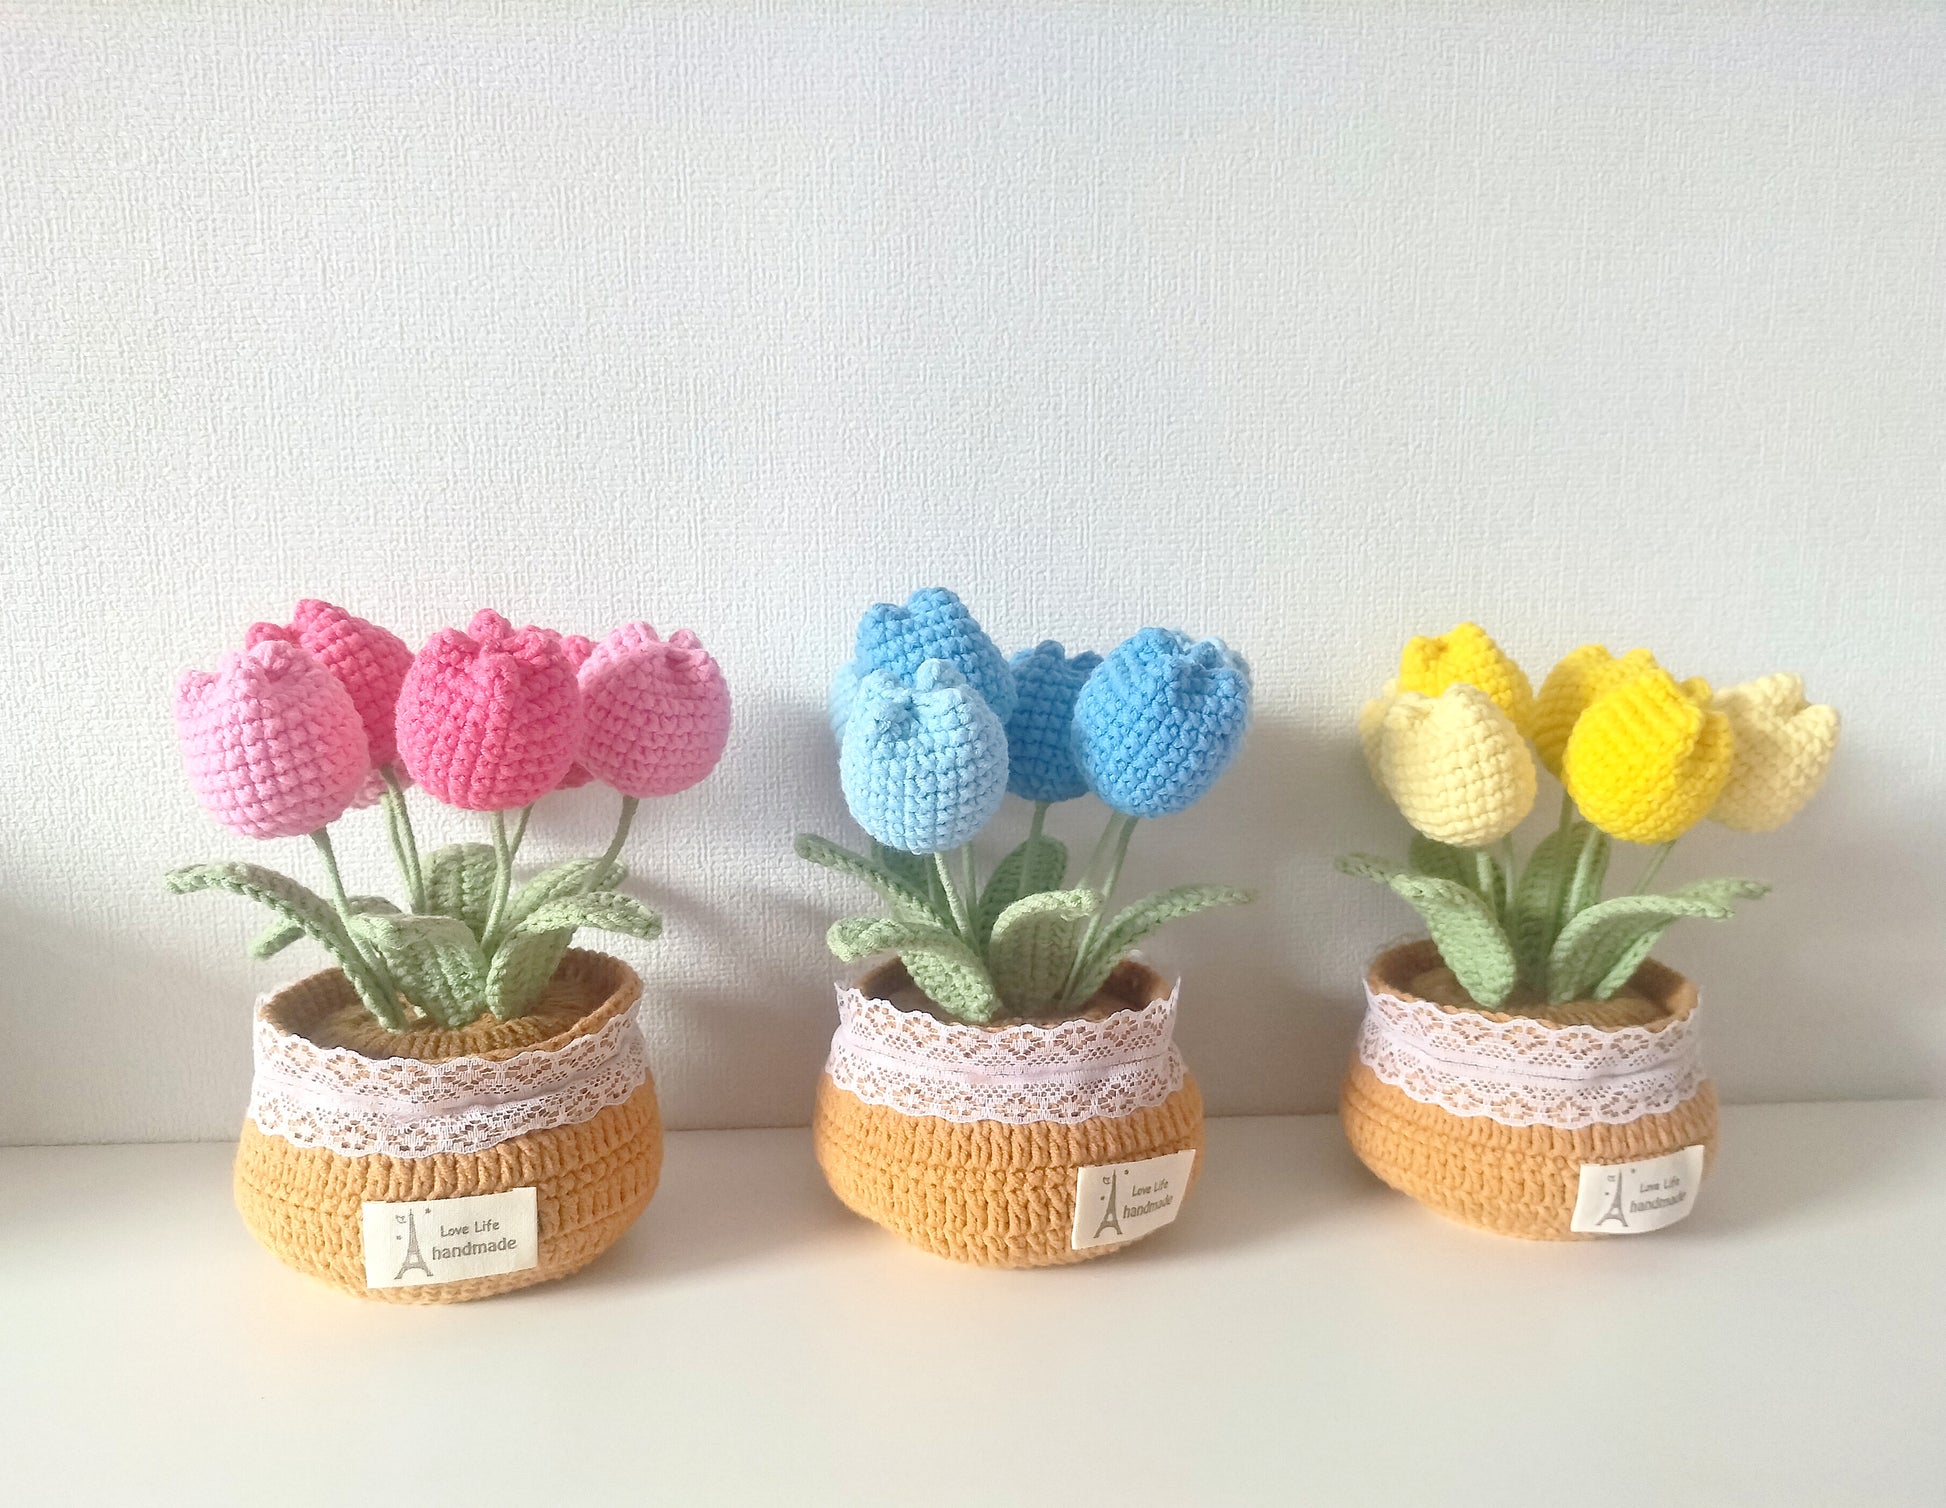 Customized tulip planters as personalized gifts